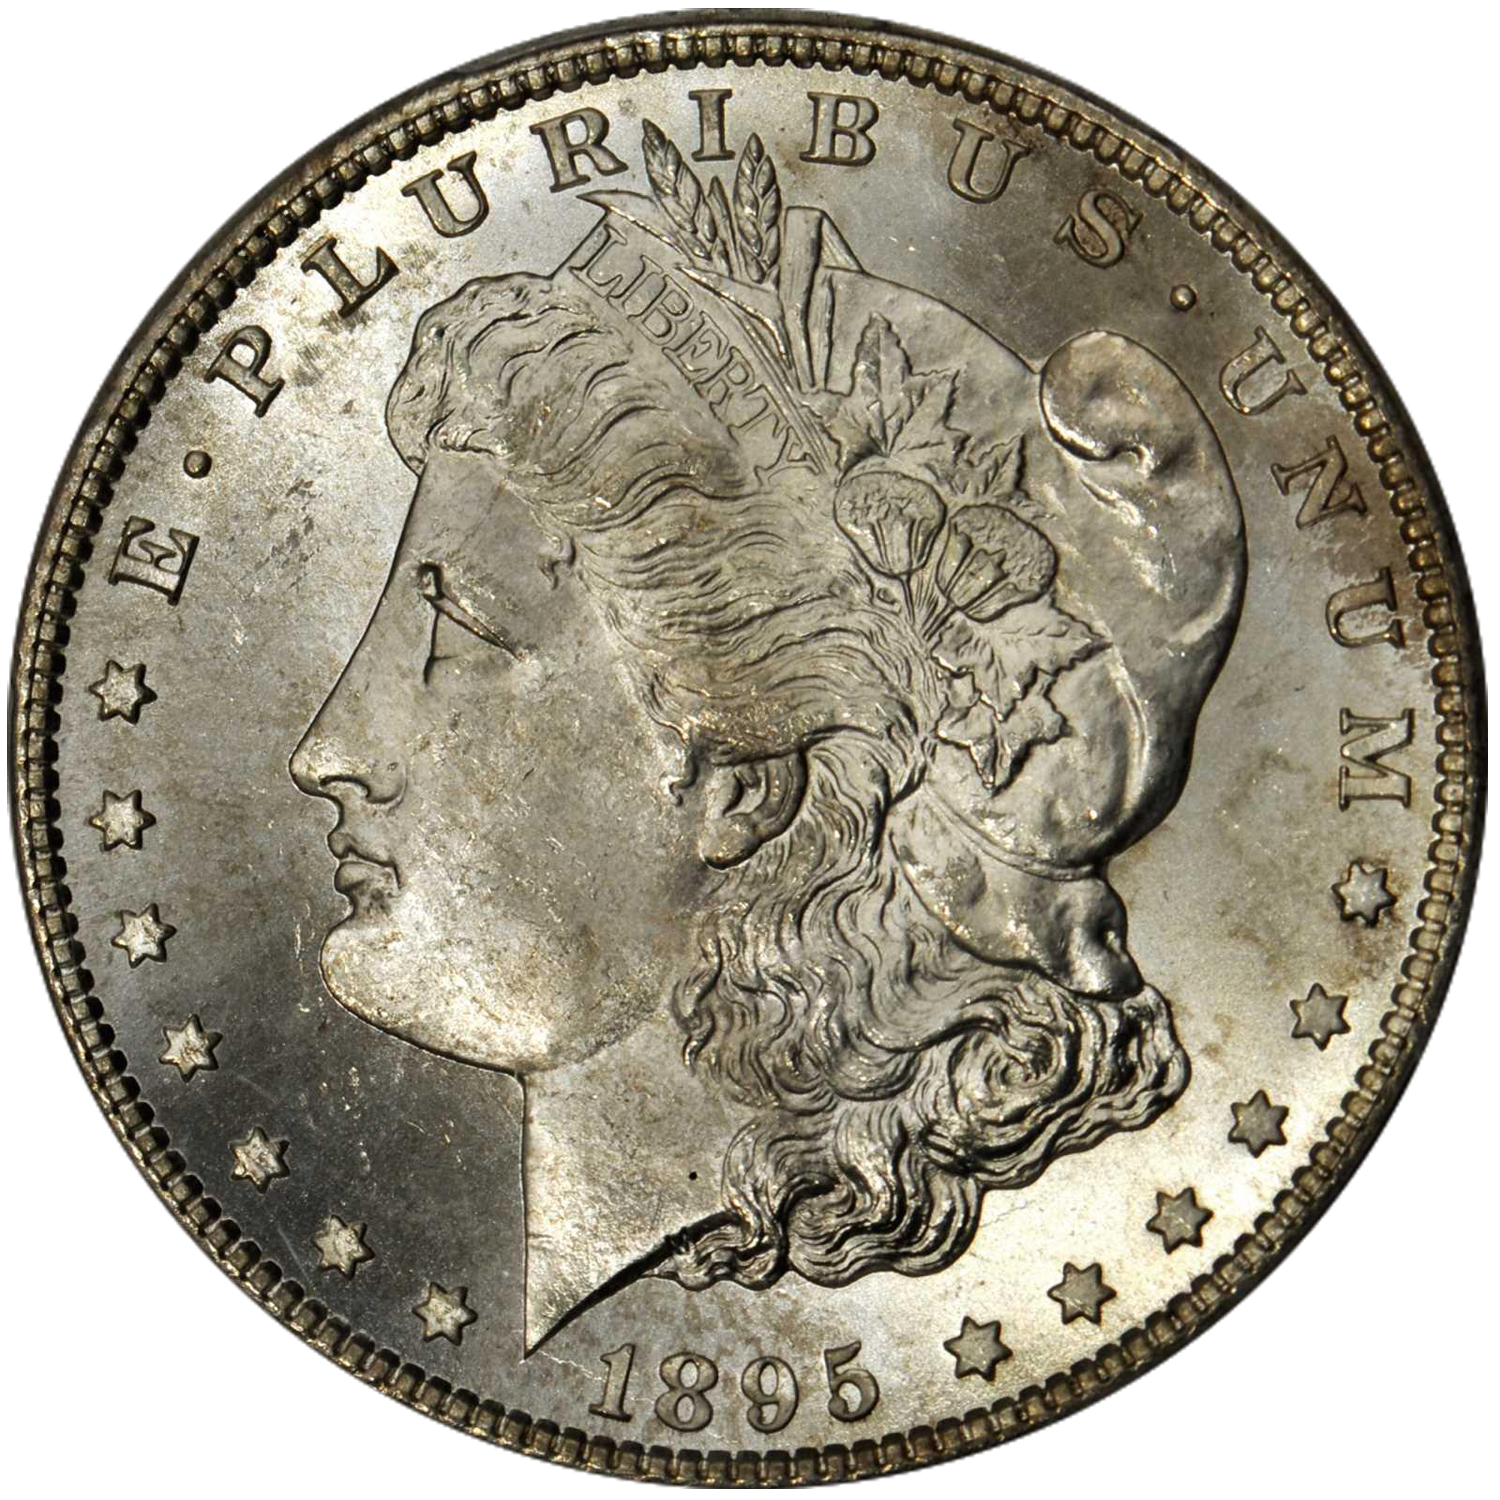 1895 s mint morgan dollar price guide value